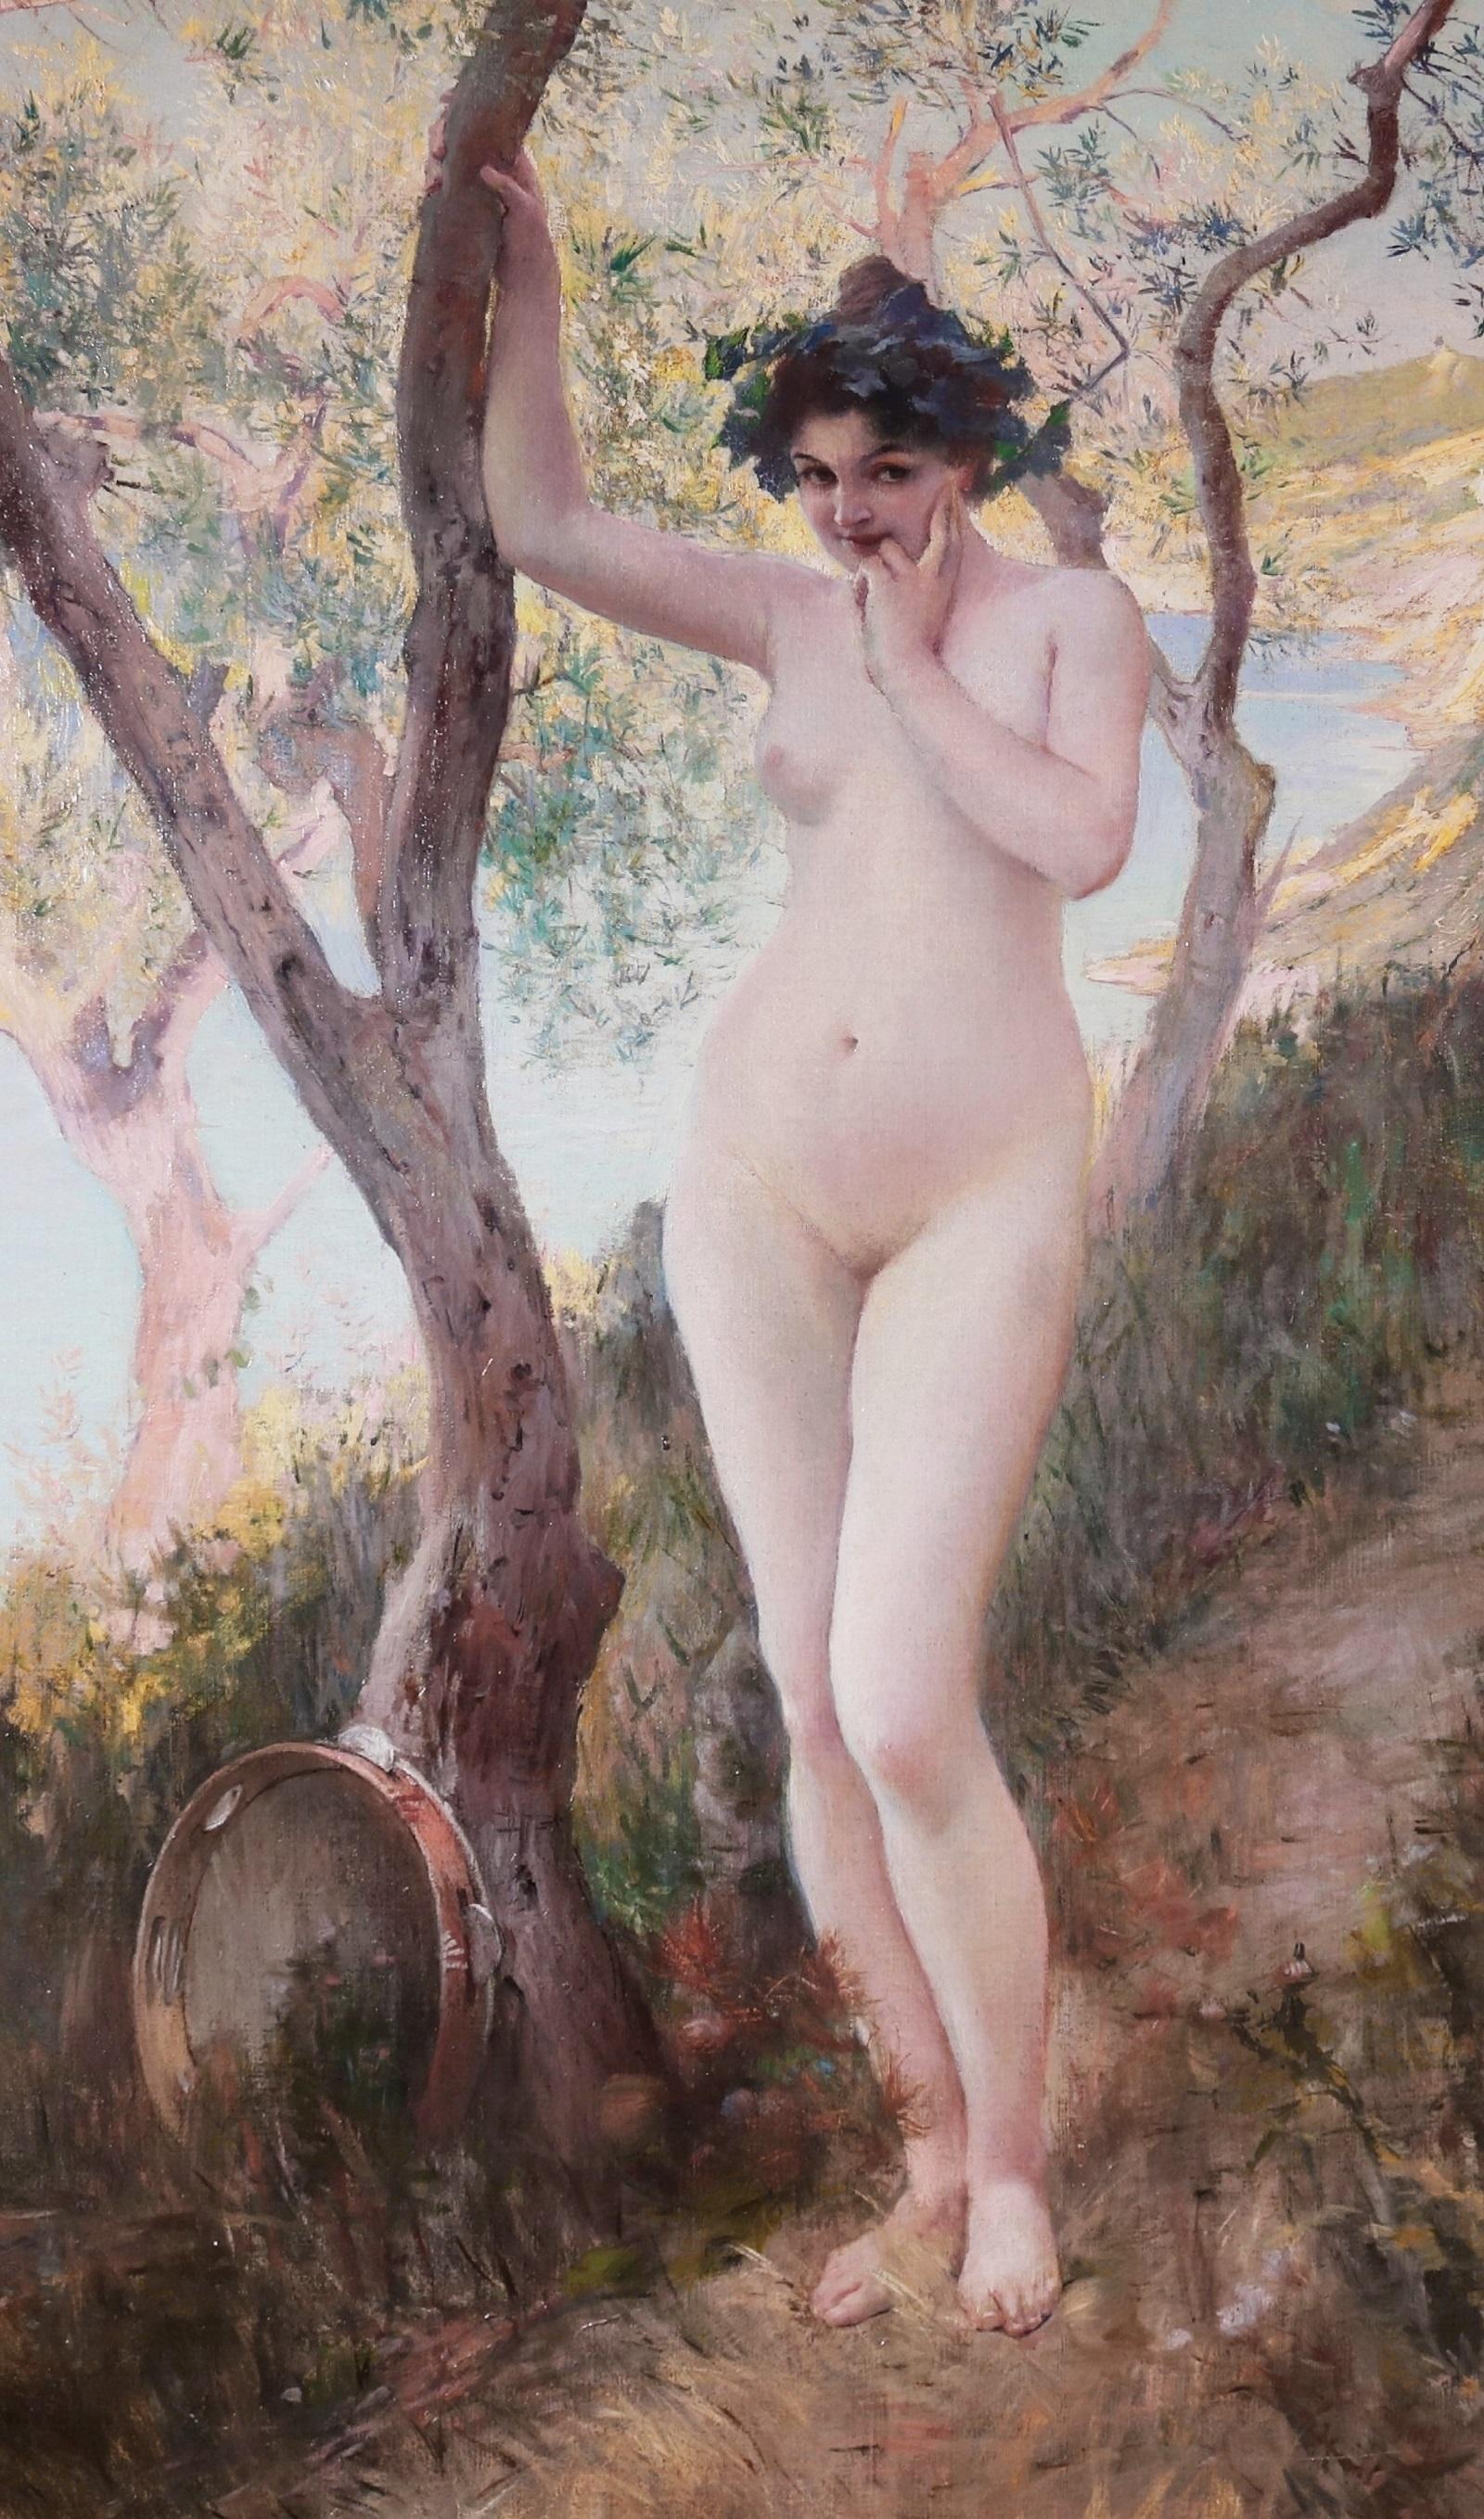 The Wood Nymph - Large 19th Century French Post Impressionist Nude Portrait  - Post-Impressionist Painting by Paul-Jean-Louis Gervais